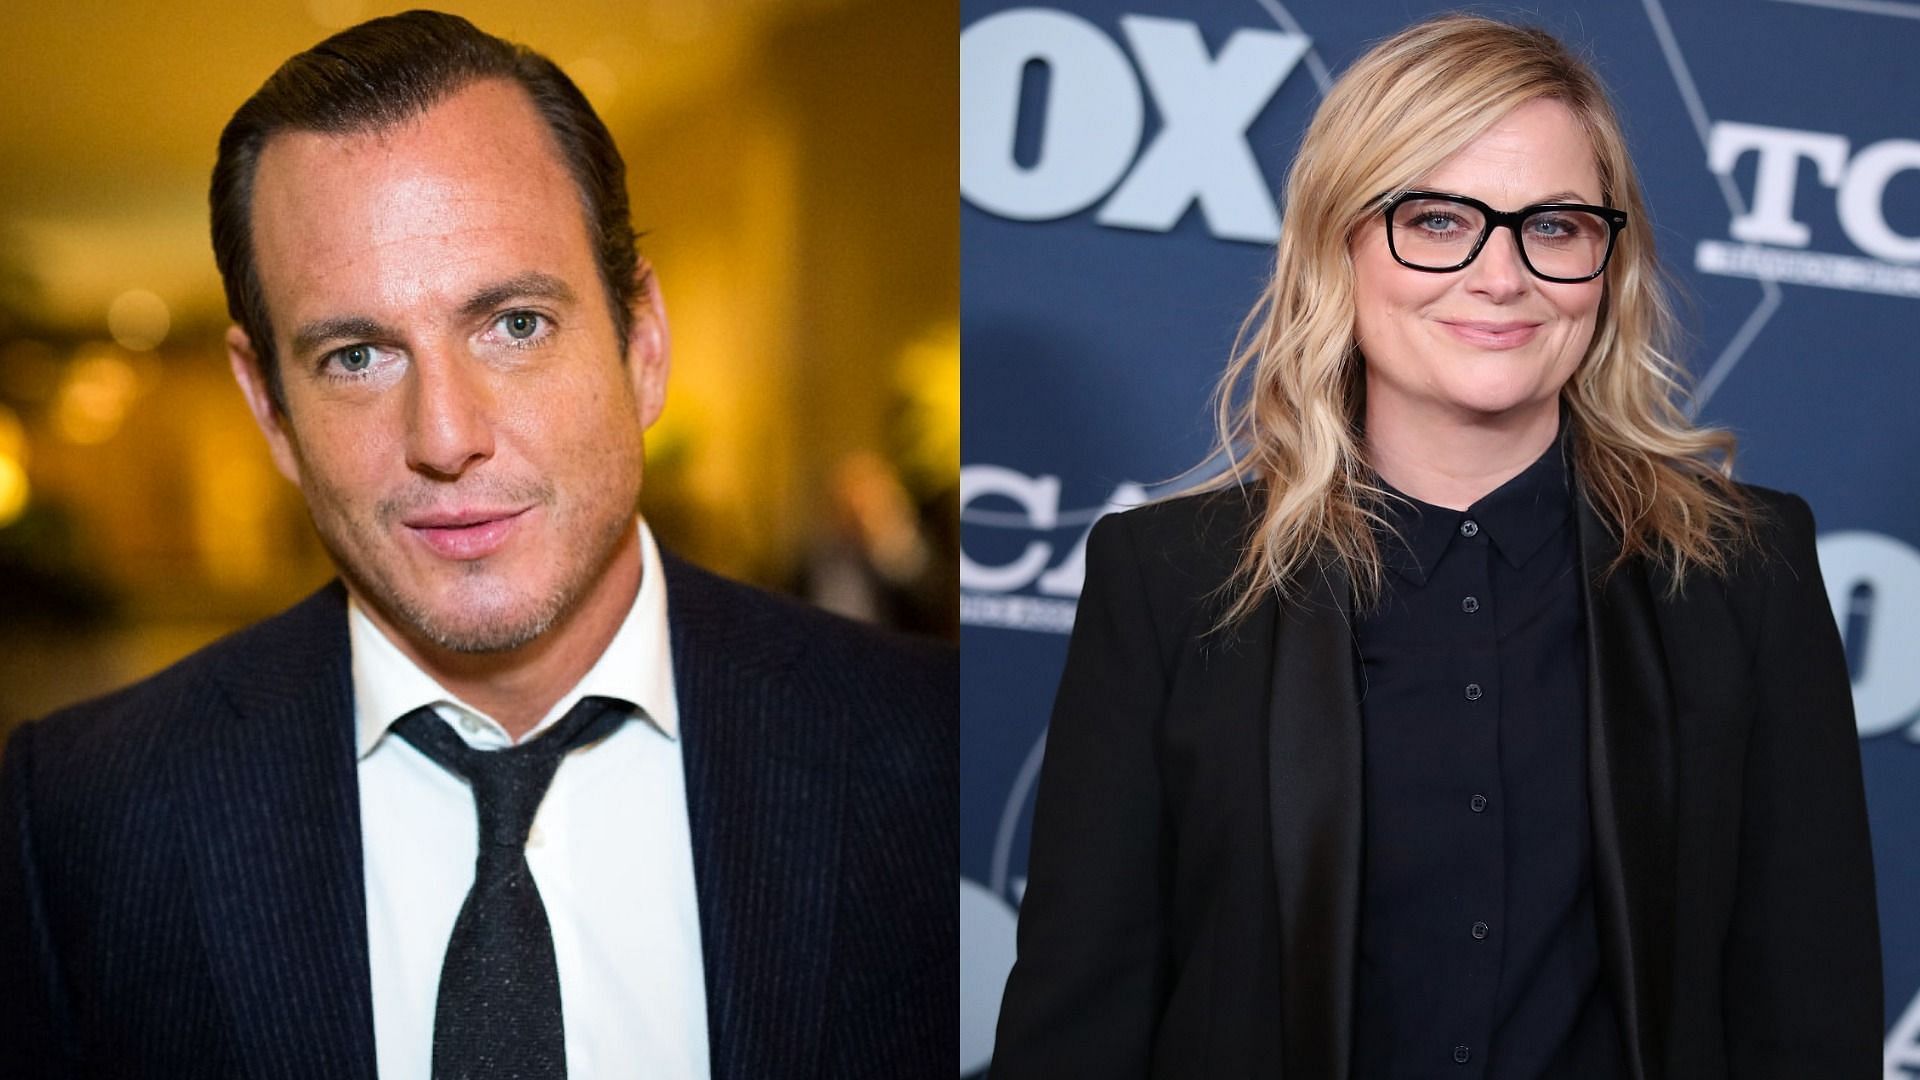 Will Arnett said the aftermath of his divorce was &quot;brutal&quot; and he cried for an hour after his split with Amy Poehler (Image via Getty Images/ Greg Doherty/ Rich Fury)